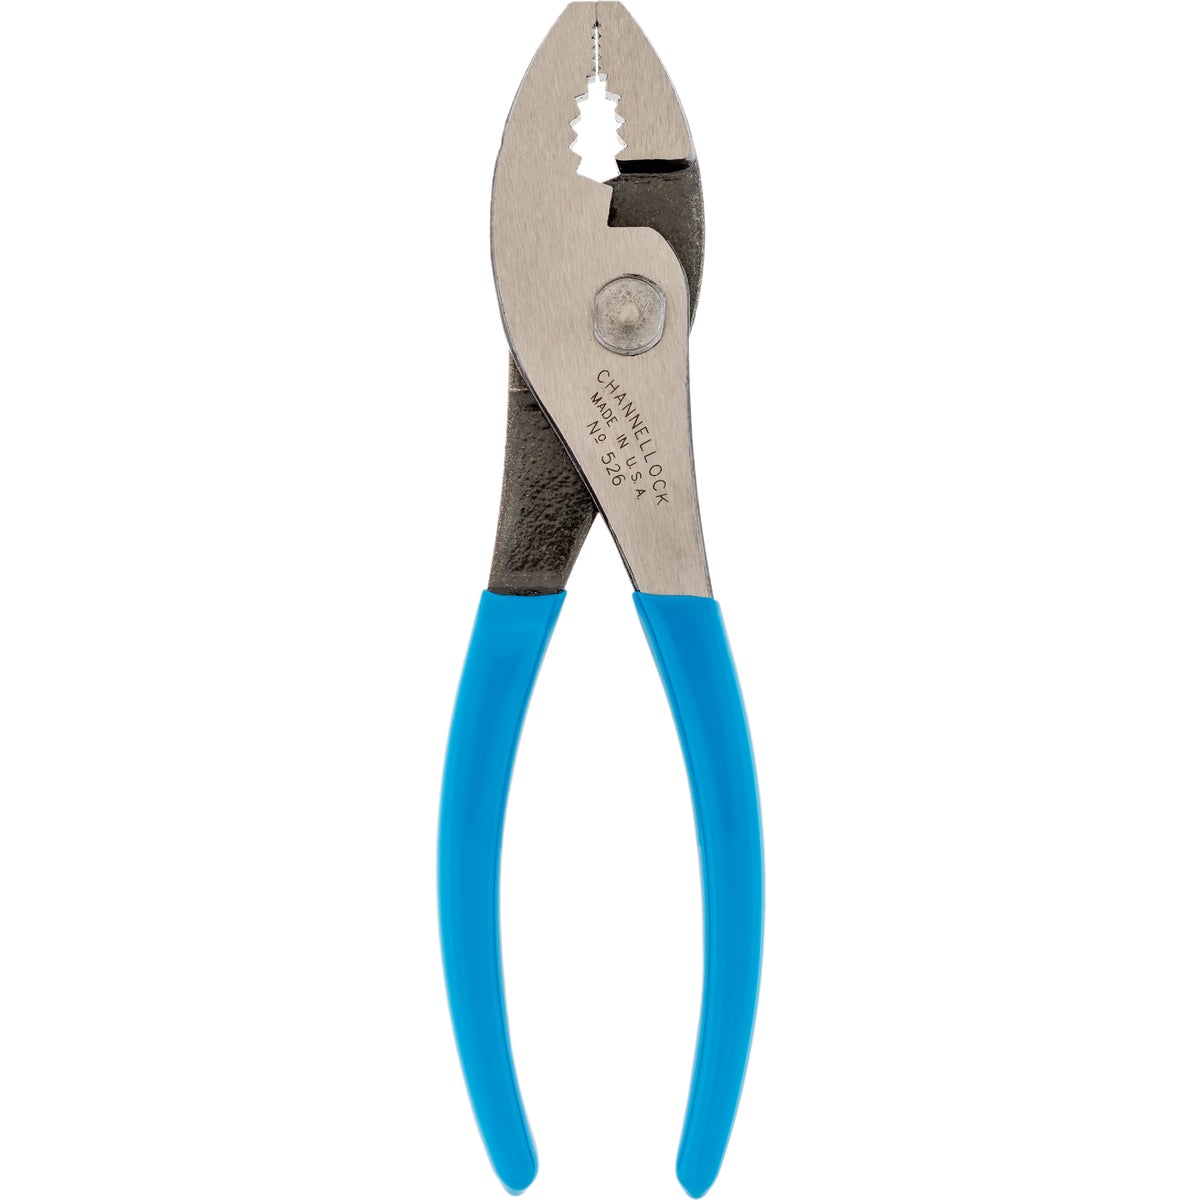 Item 333026, Thick nose pliers. Shear-type wire cutter.